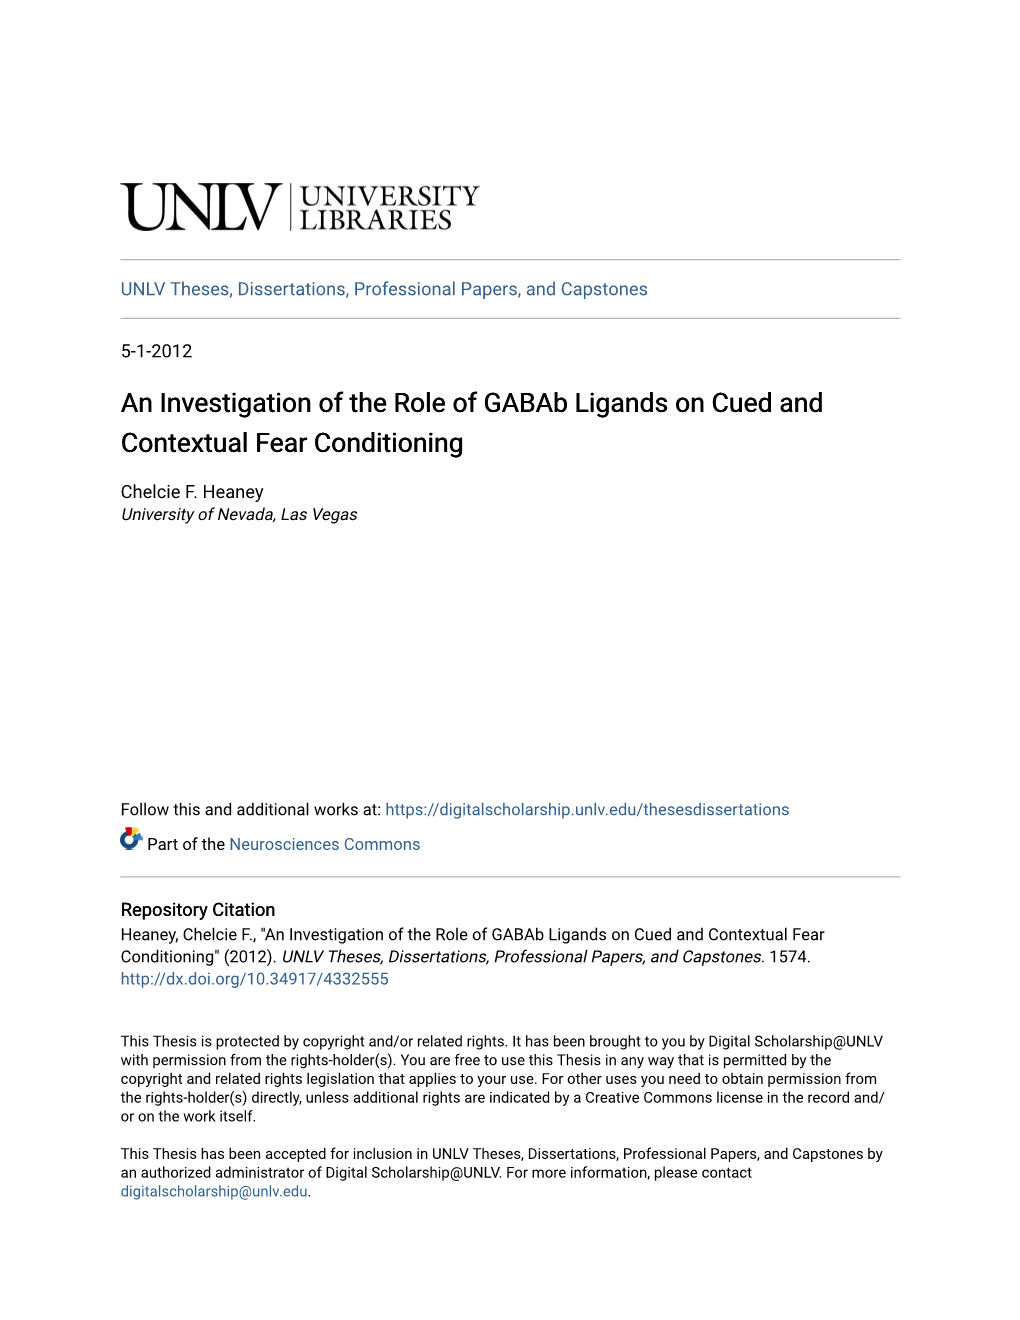 An Investigation of the Role of Gabab Ligands on Cued and Contextual Fear Conditioning